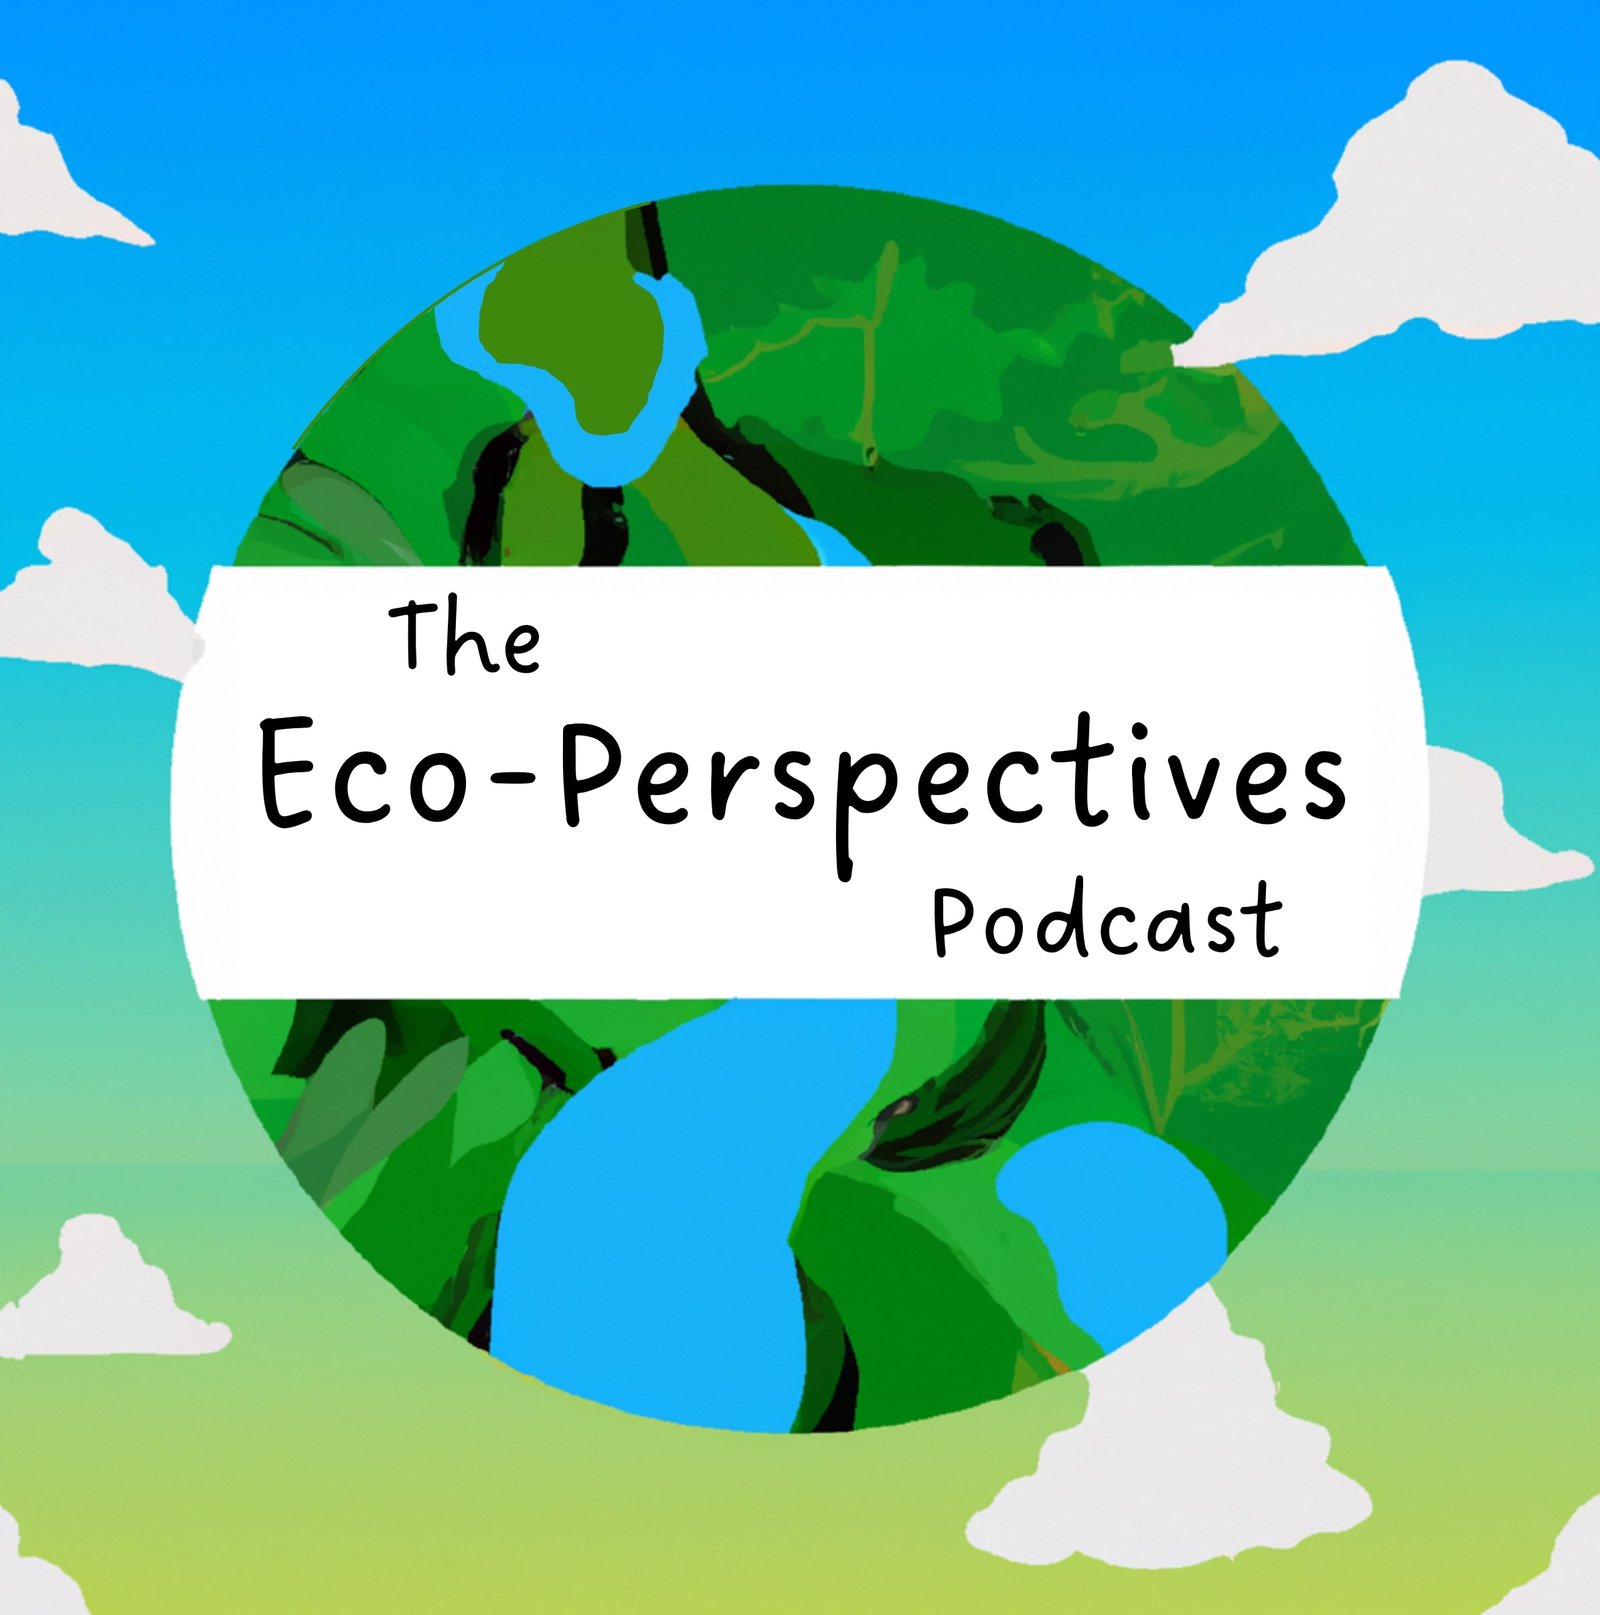 The Eco-Perspectives Podcast logo